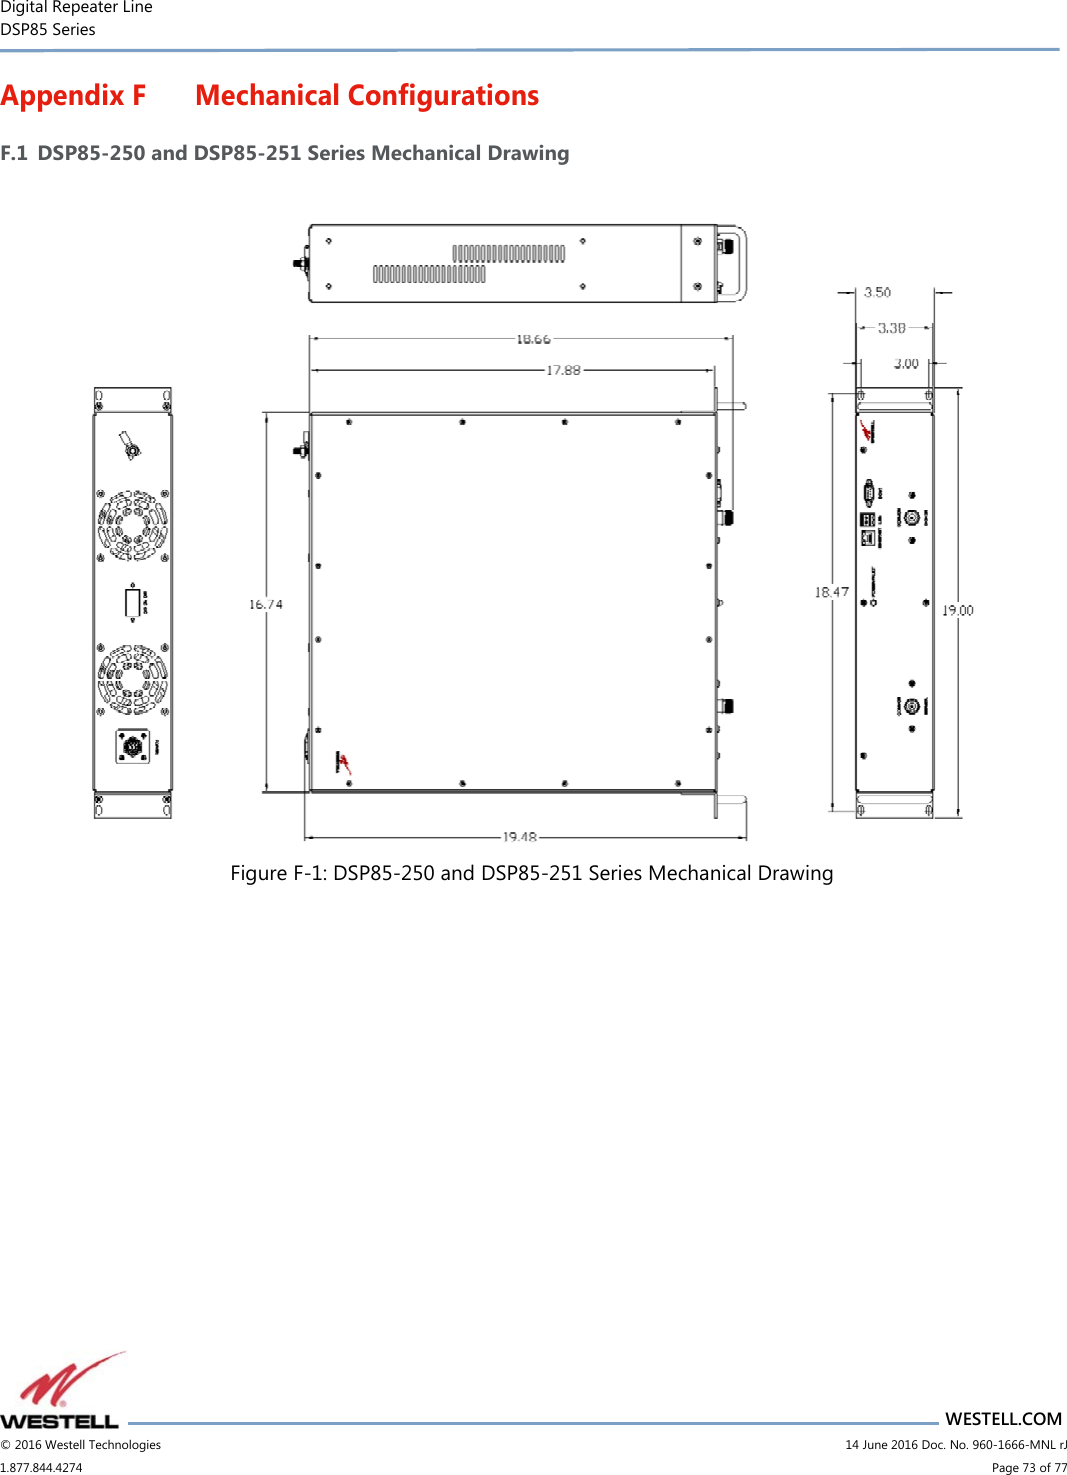 Digital Repeater Line DSP85 Series                       WESTELL.COM © 2016 Westell Technologies                         14 June 2016 Doc. No. 960-1666-MNL rJ 1.877.844.4274                             Page 73 of 77  Appendix F Mechanical Configurations F.1 DSP85-250 and DSP85-251 Series Mechanical Drawing   Figure F-1: DSP85-250 and DSP85-251 Series Mechanical Drawing     